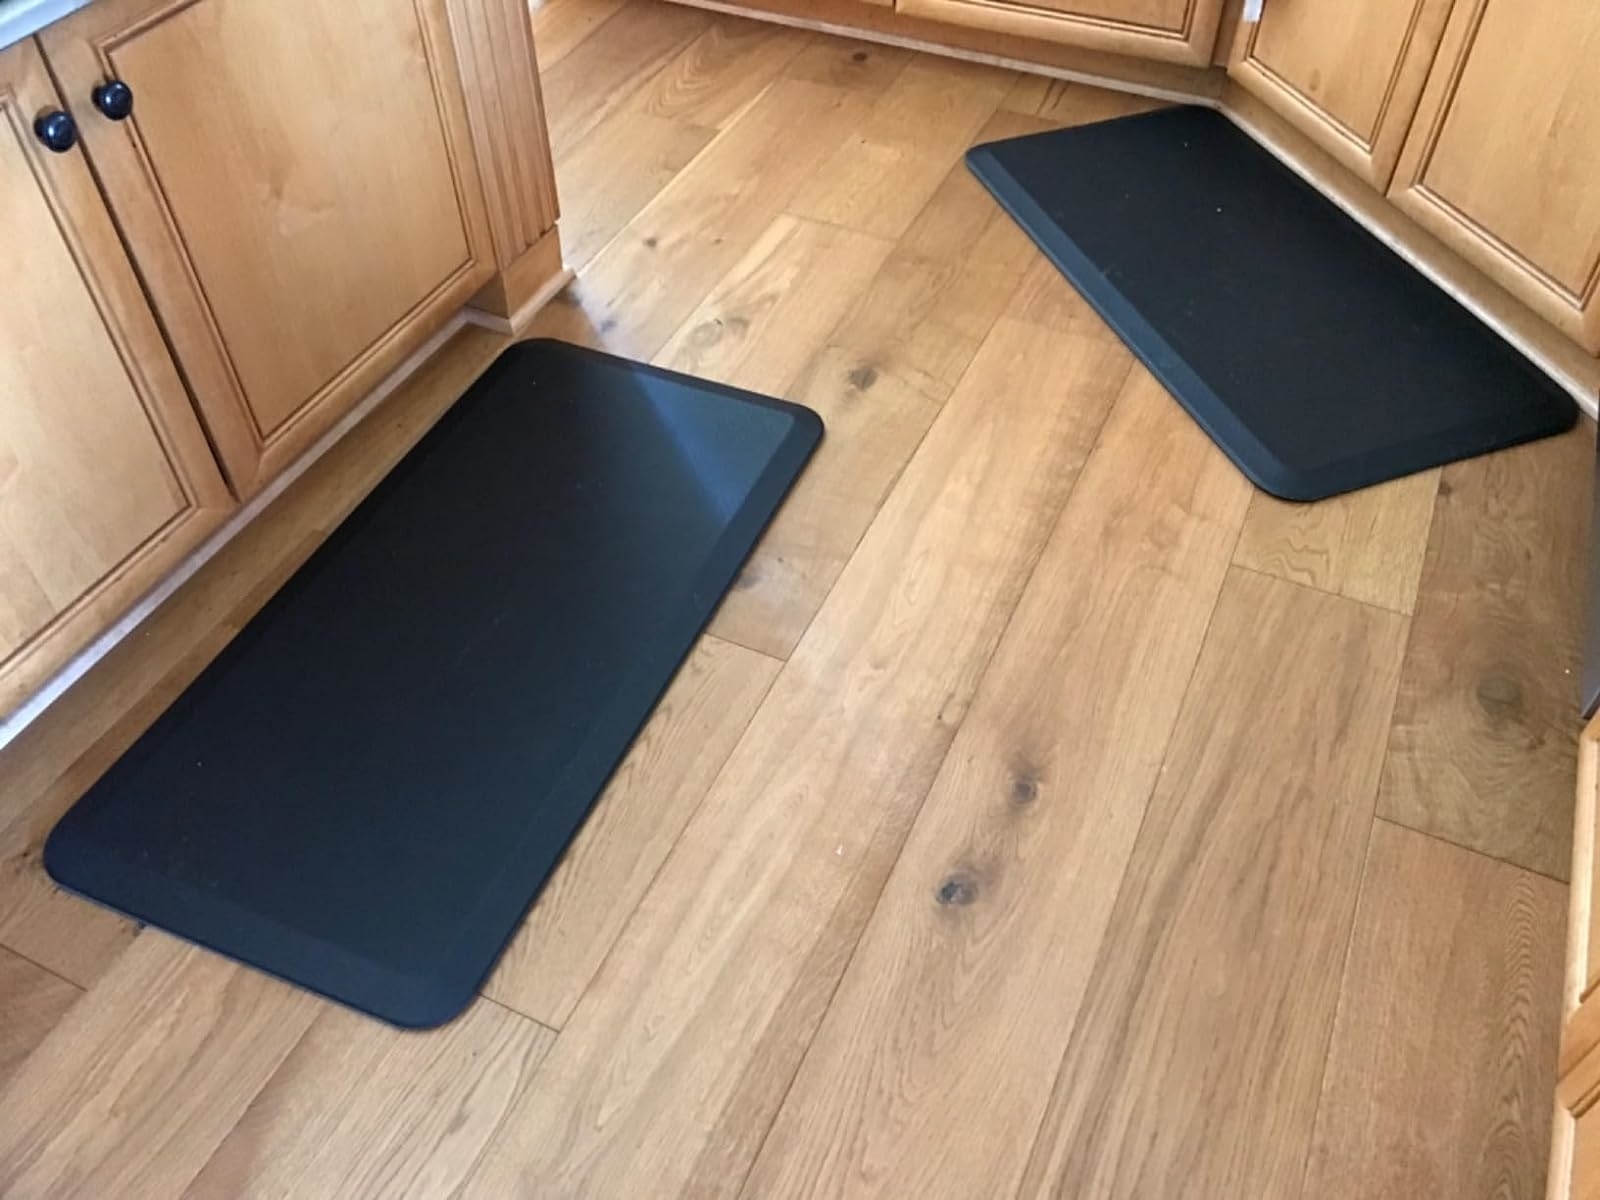 Two anti-fatigue kitchen mats on a wooden floor